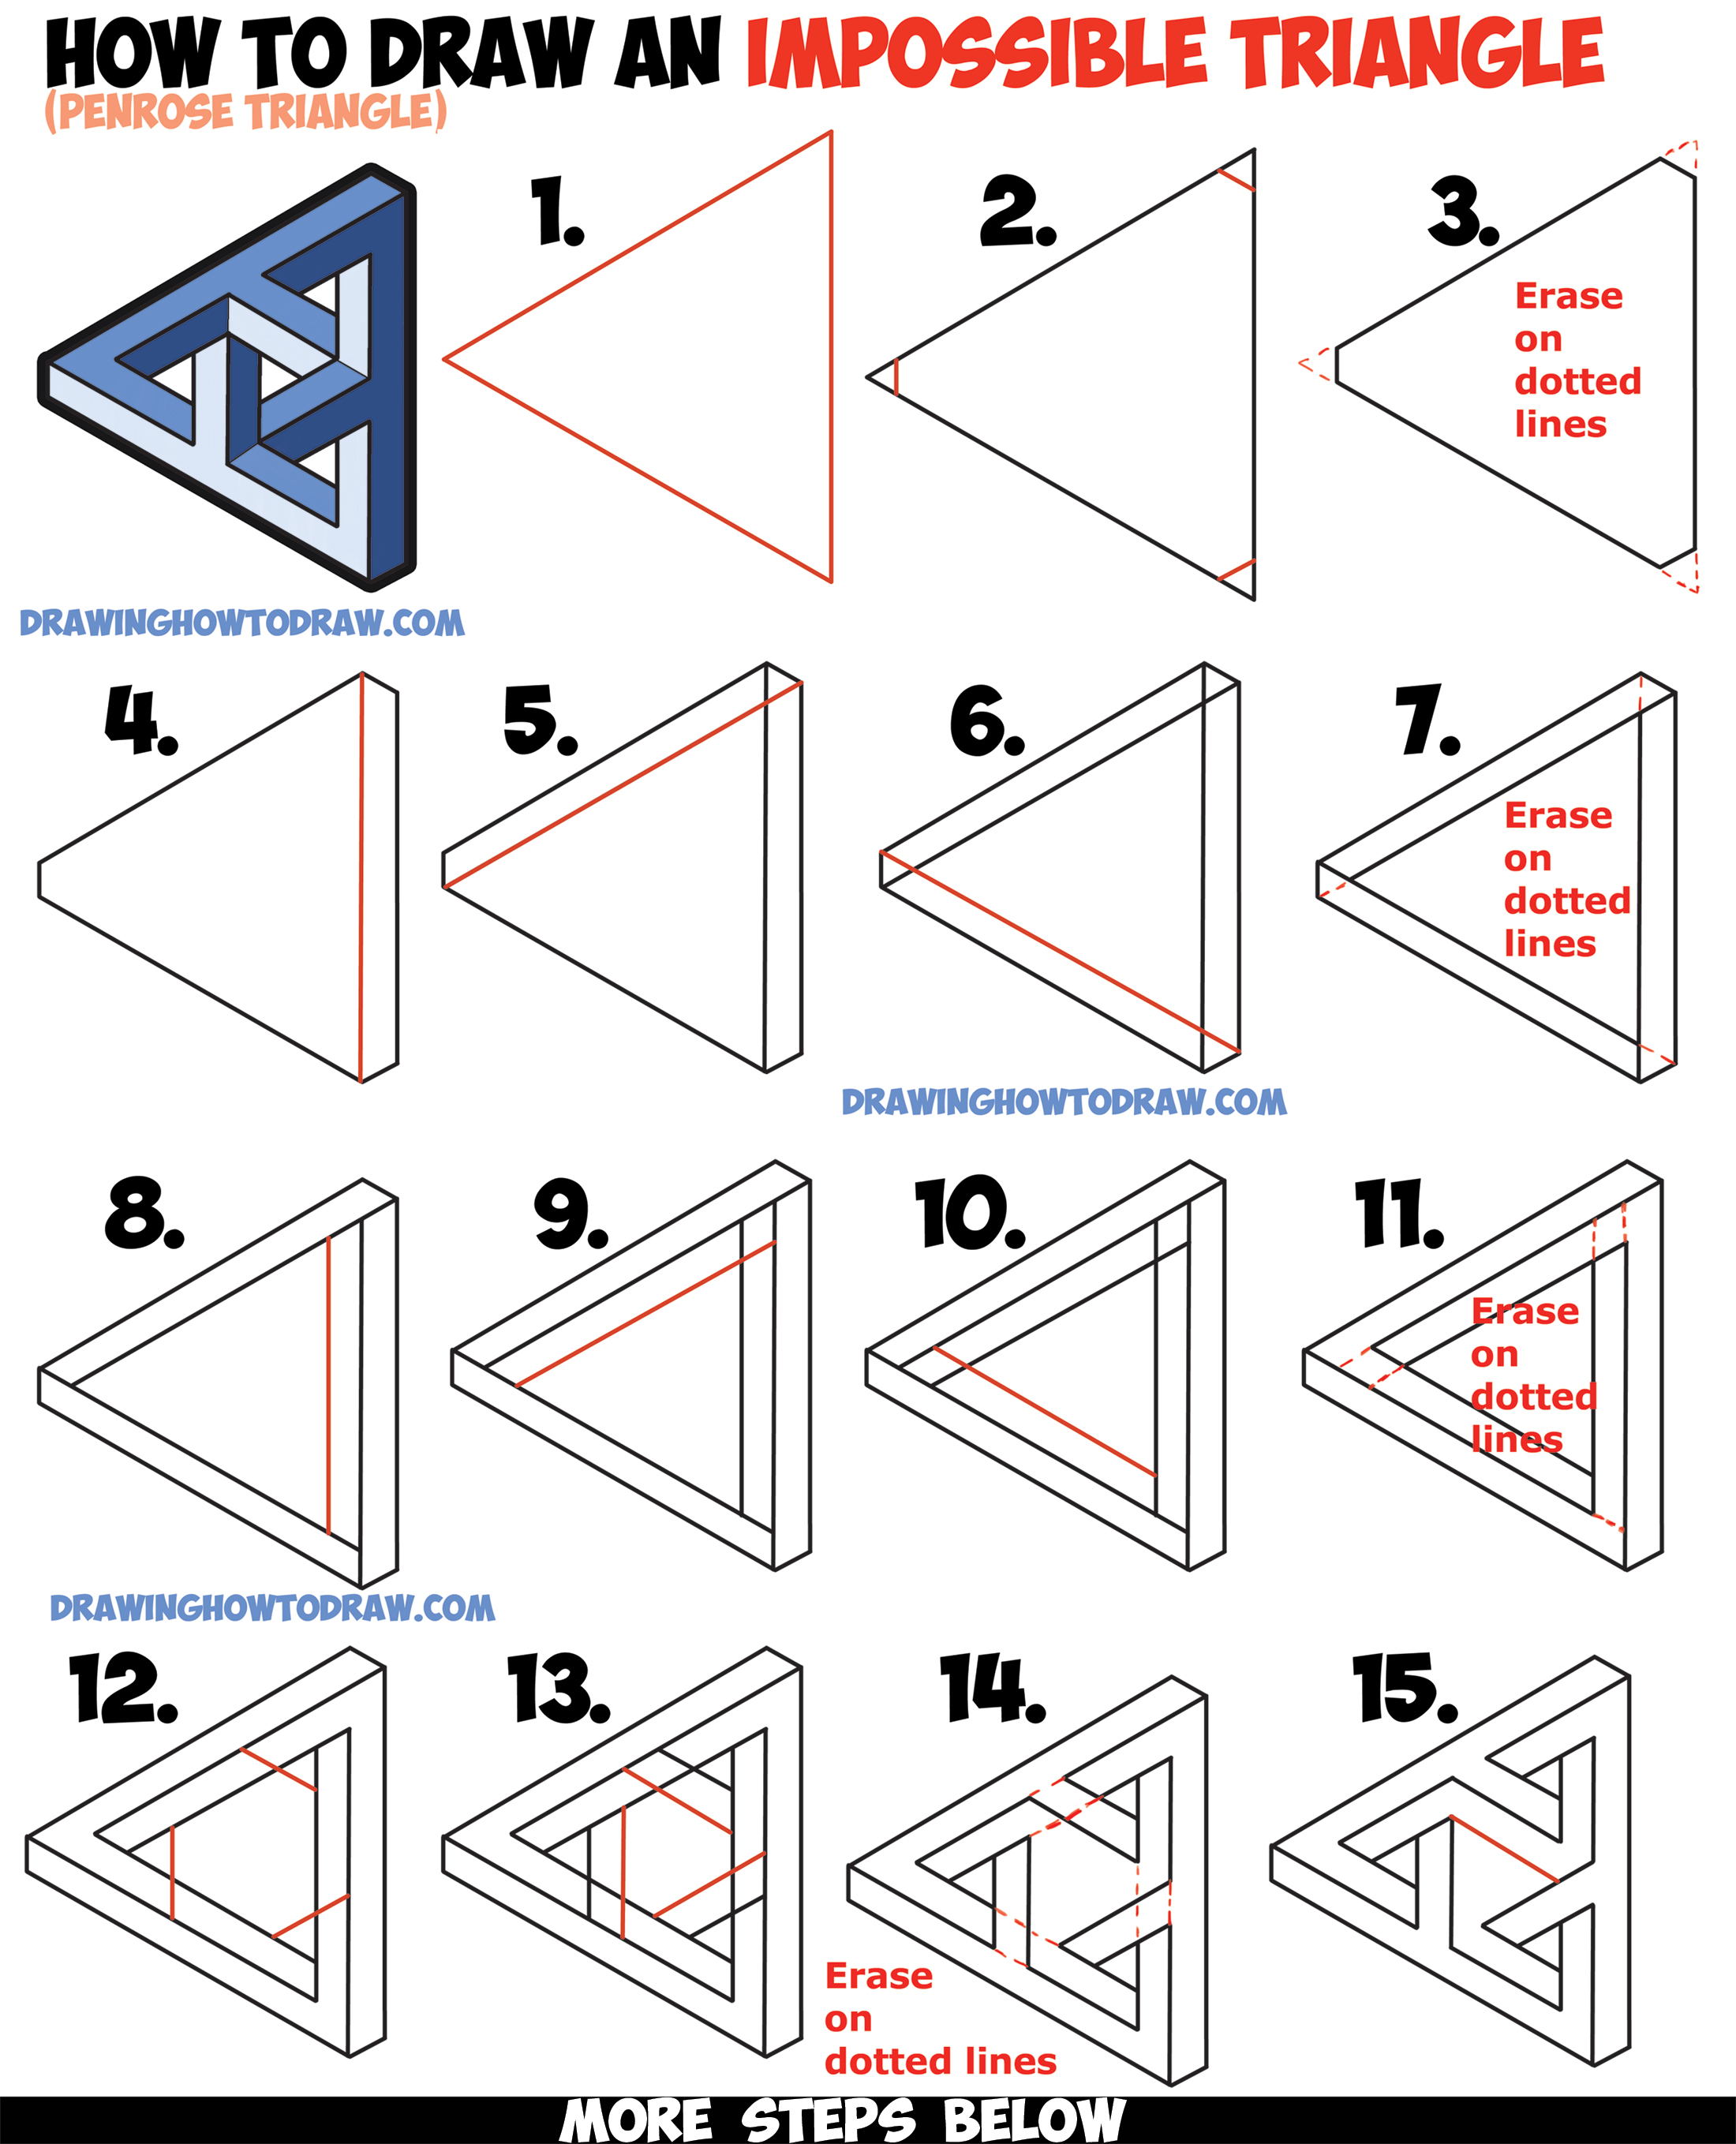 How to Draw an Impossible Triangle (Penrose Triangle) That Looks Woven in a Celtic Style Easy Step by Step Drawing Tutorial for Beginners